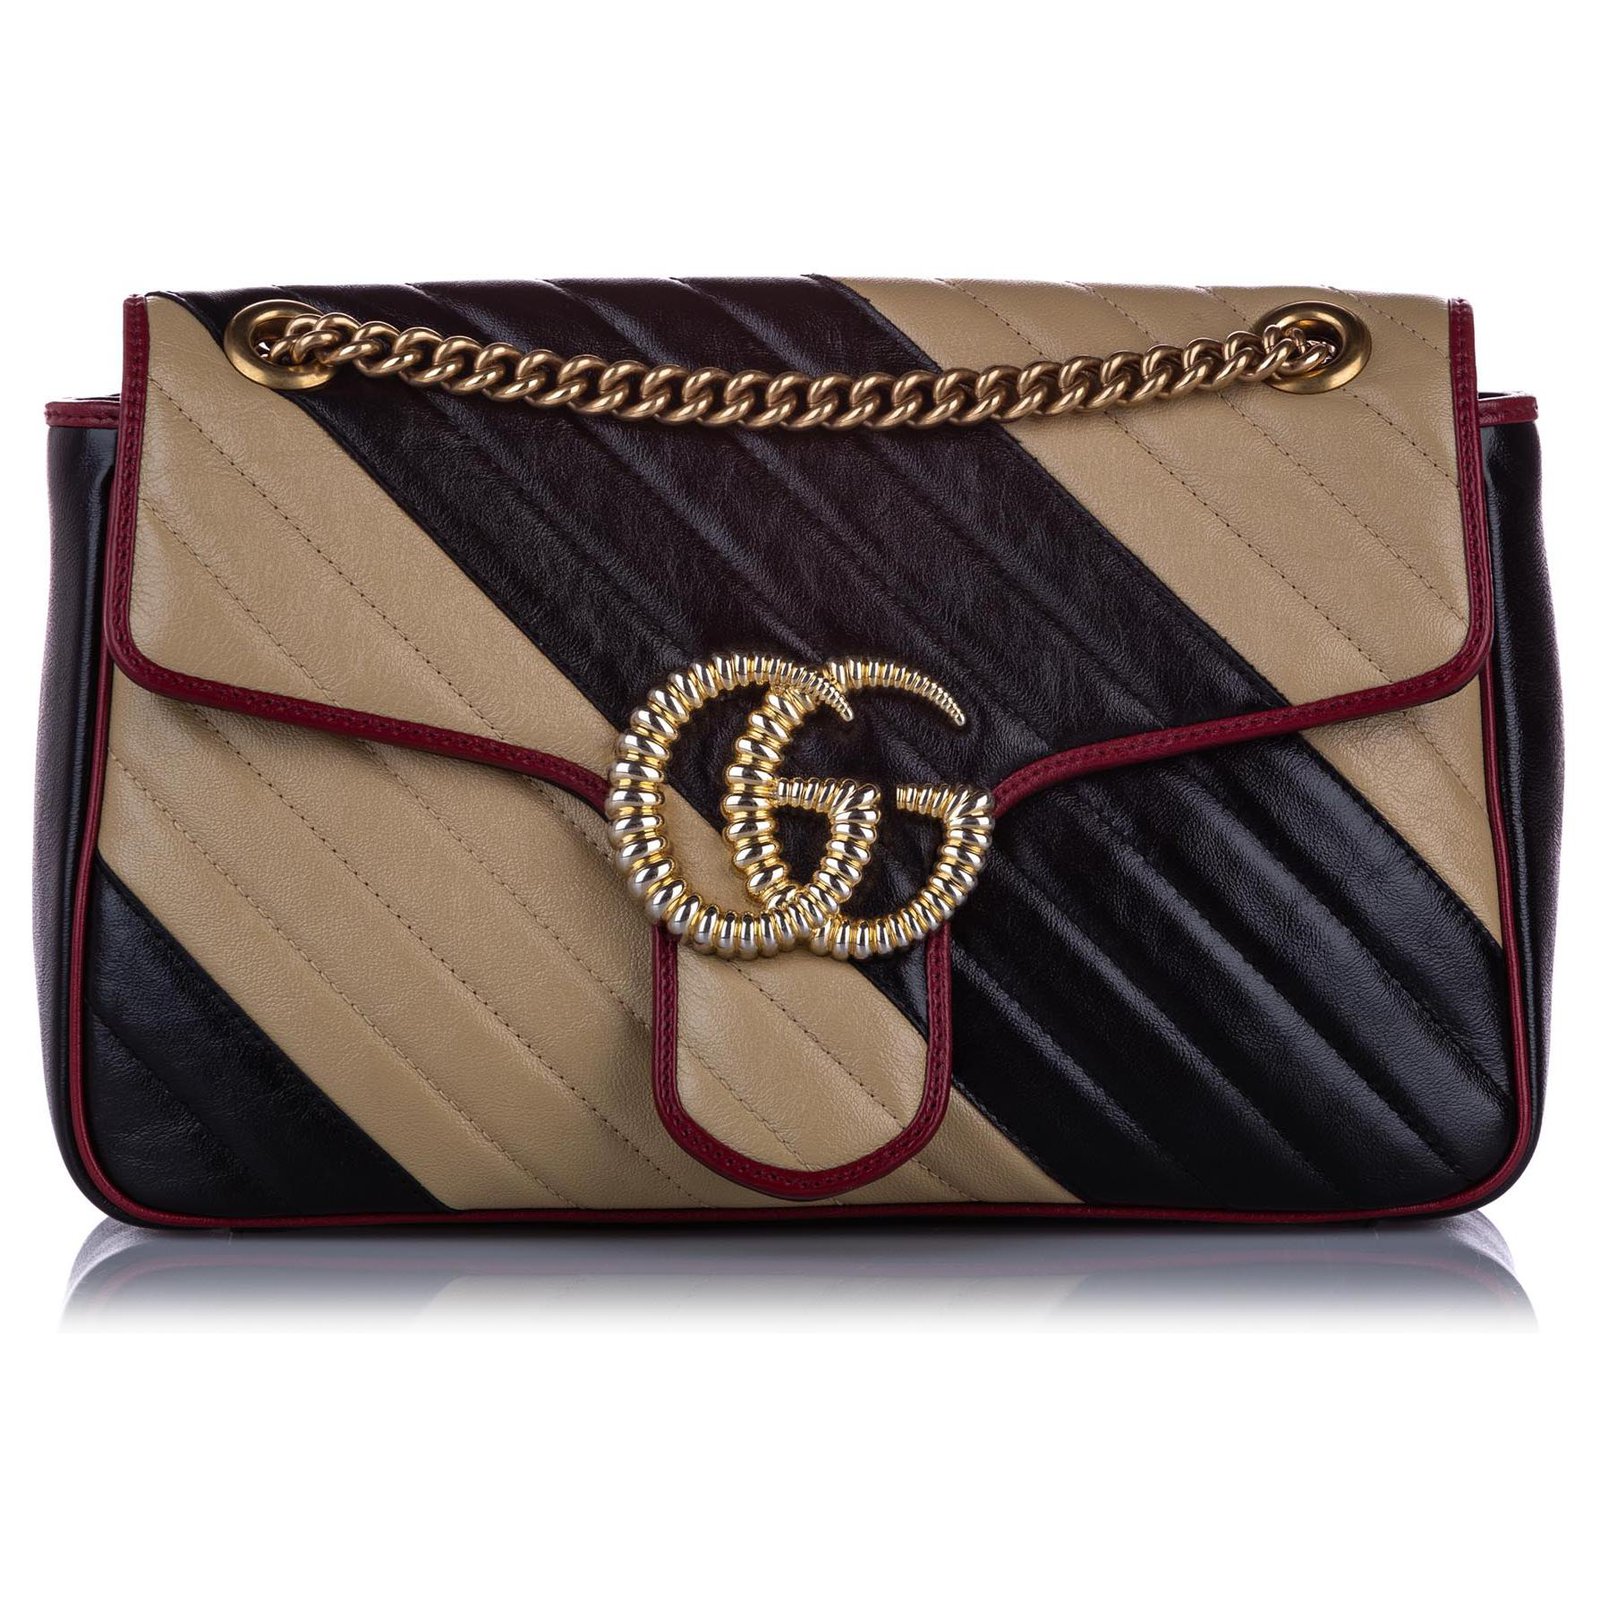 GUCCI GG Marmont quilted leather shoulder bag  Black gucci bag, Gucci bag  outfit, Leather shoulder bag